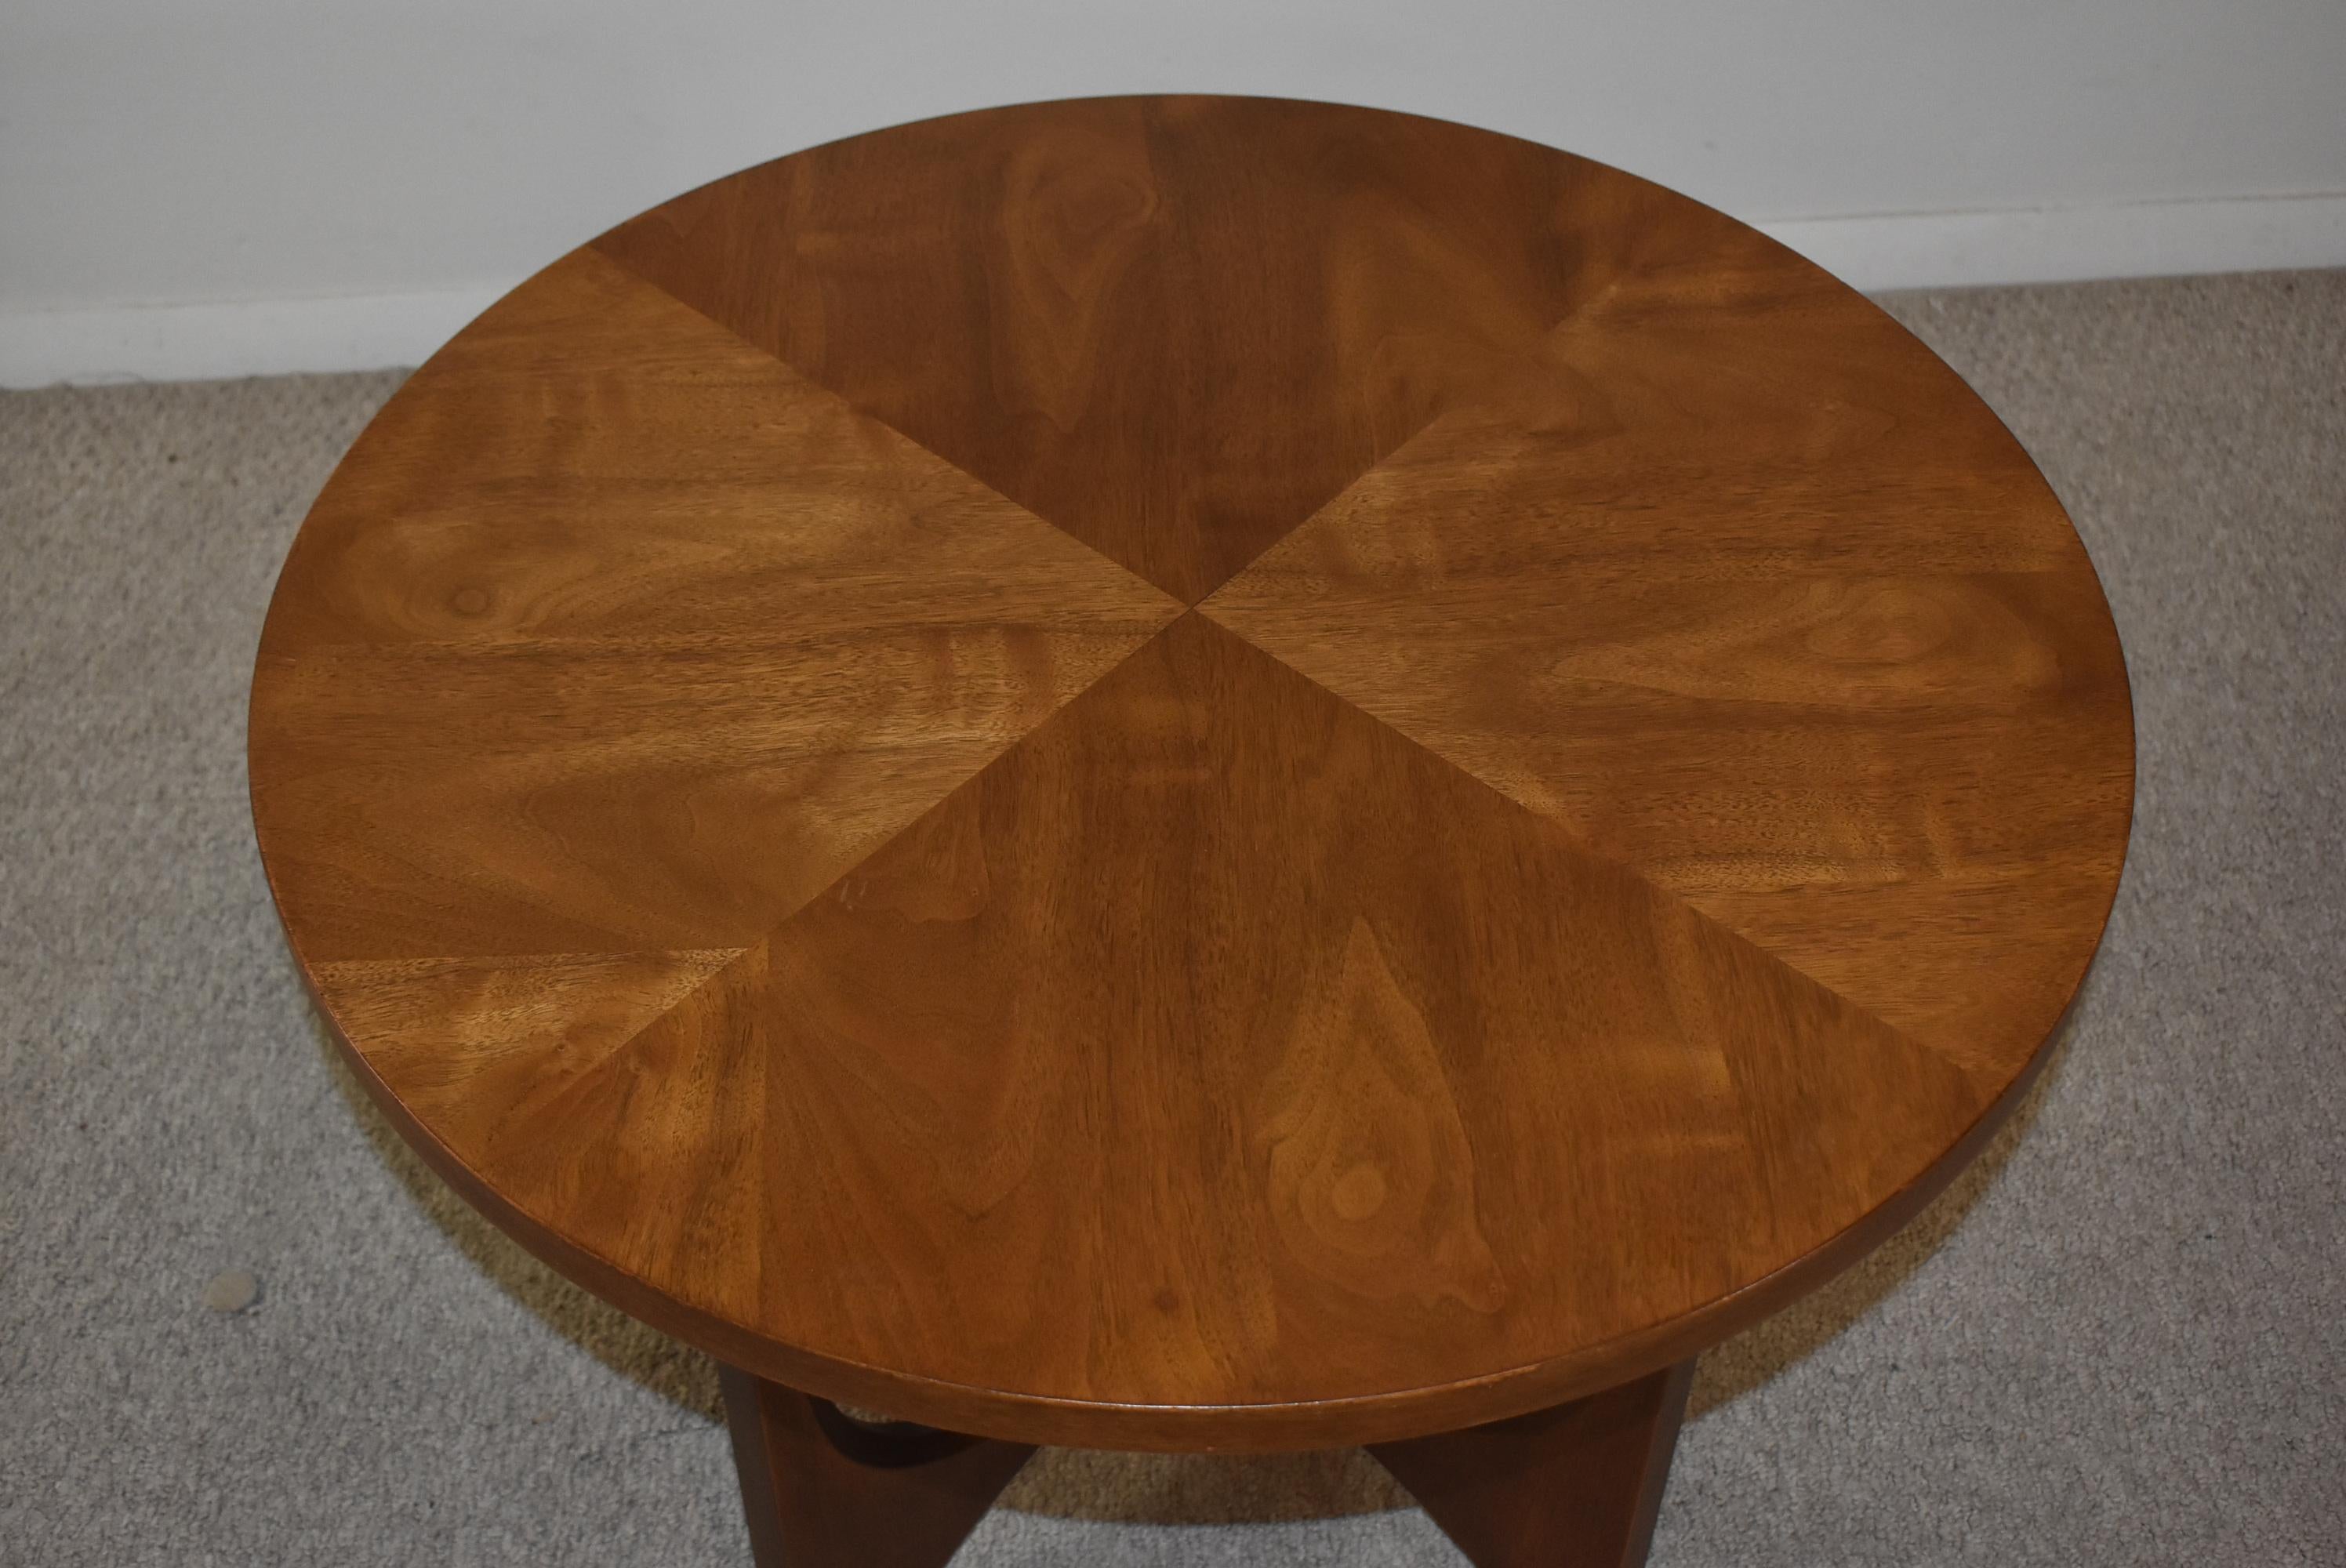 This walnut side table is from the Brasilia collection from Broyhill. This piece features contoured legs and a 28